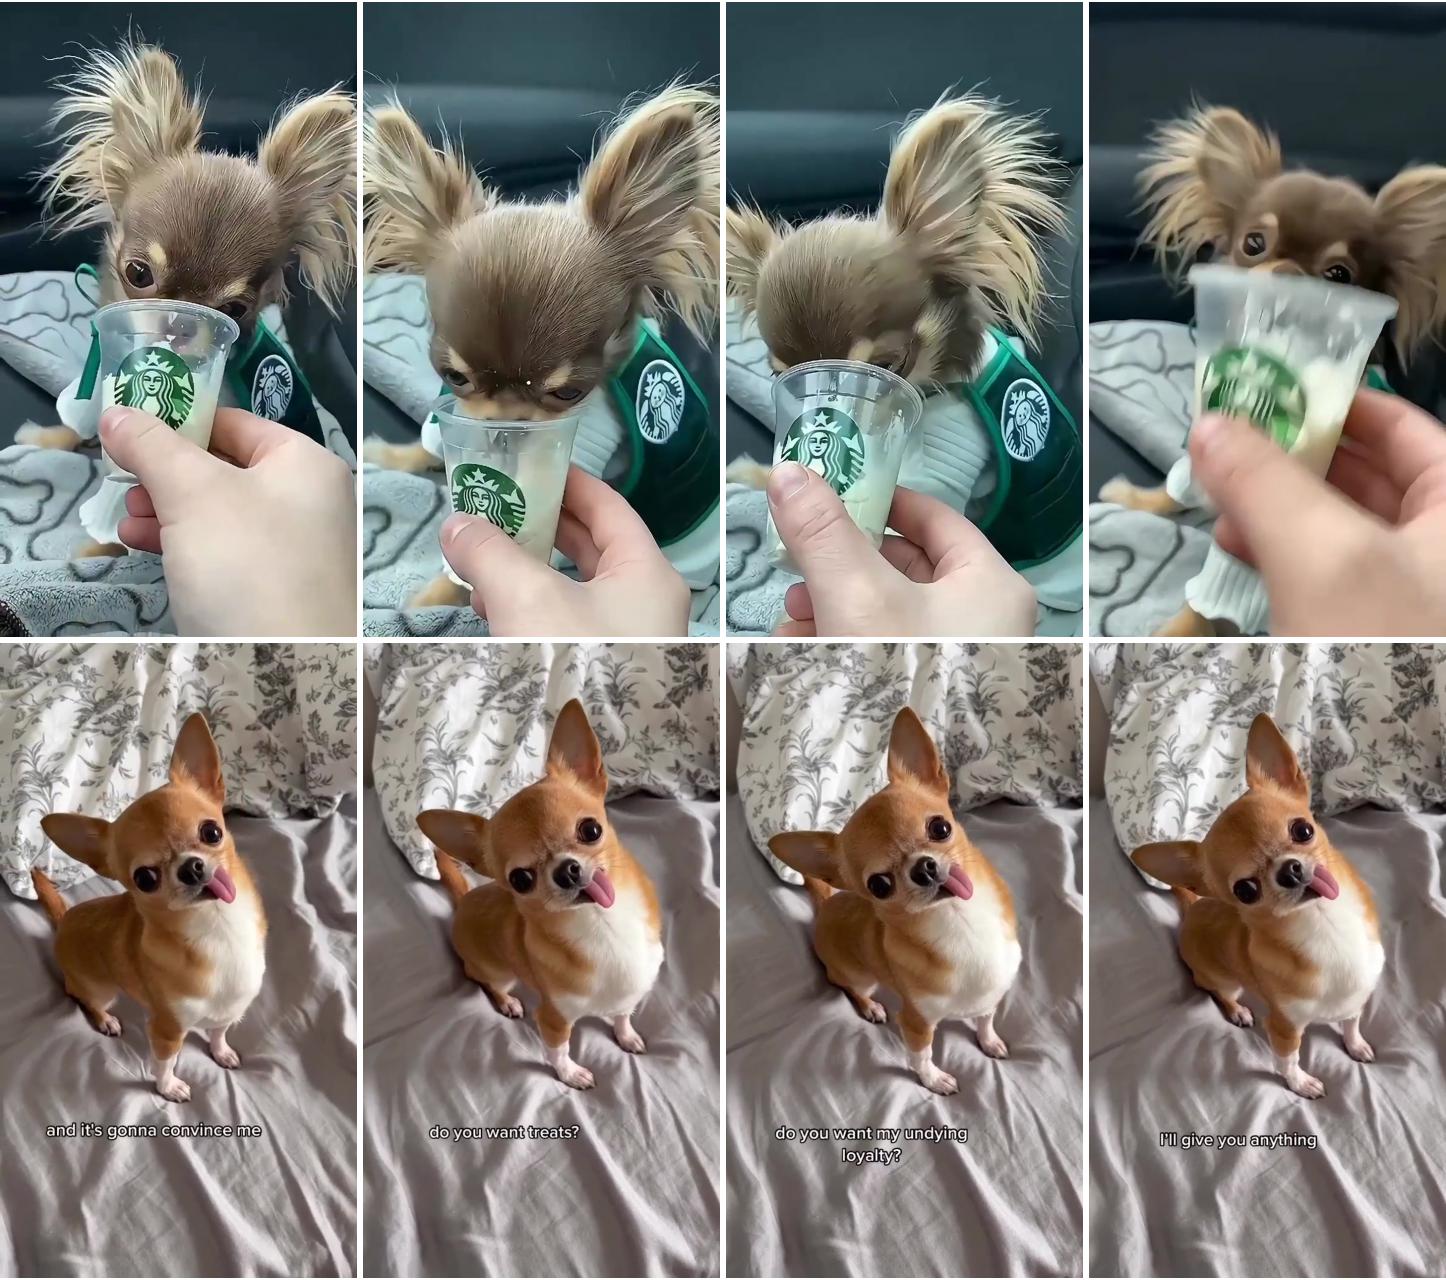 Dog eating fancam very sweet; why your chihuahua's tongue is sticking out